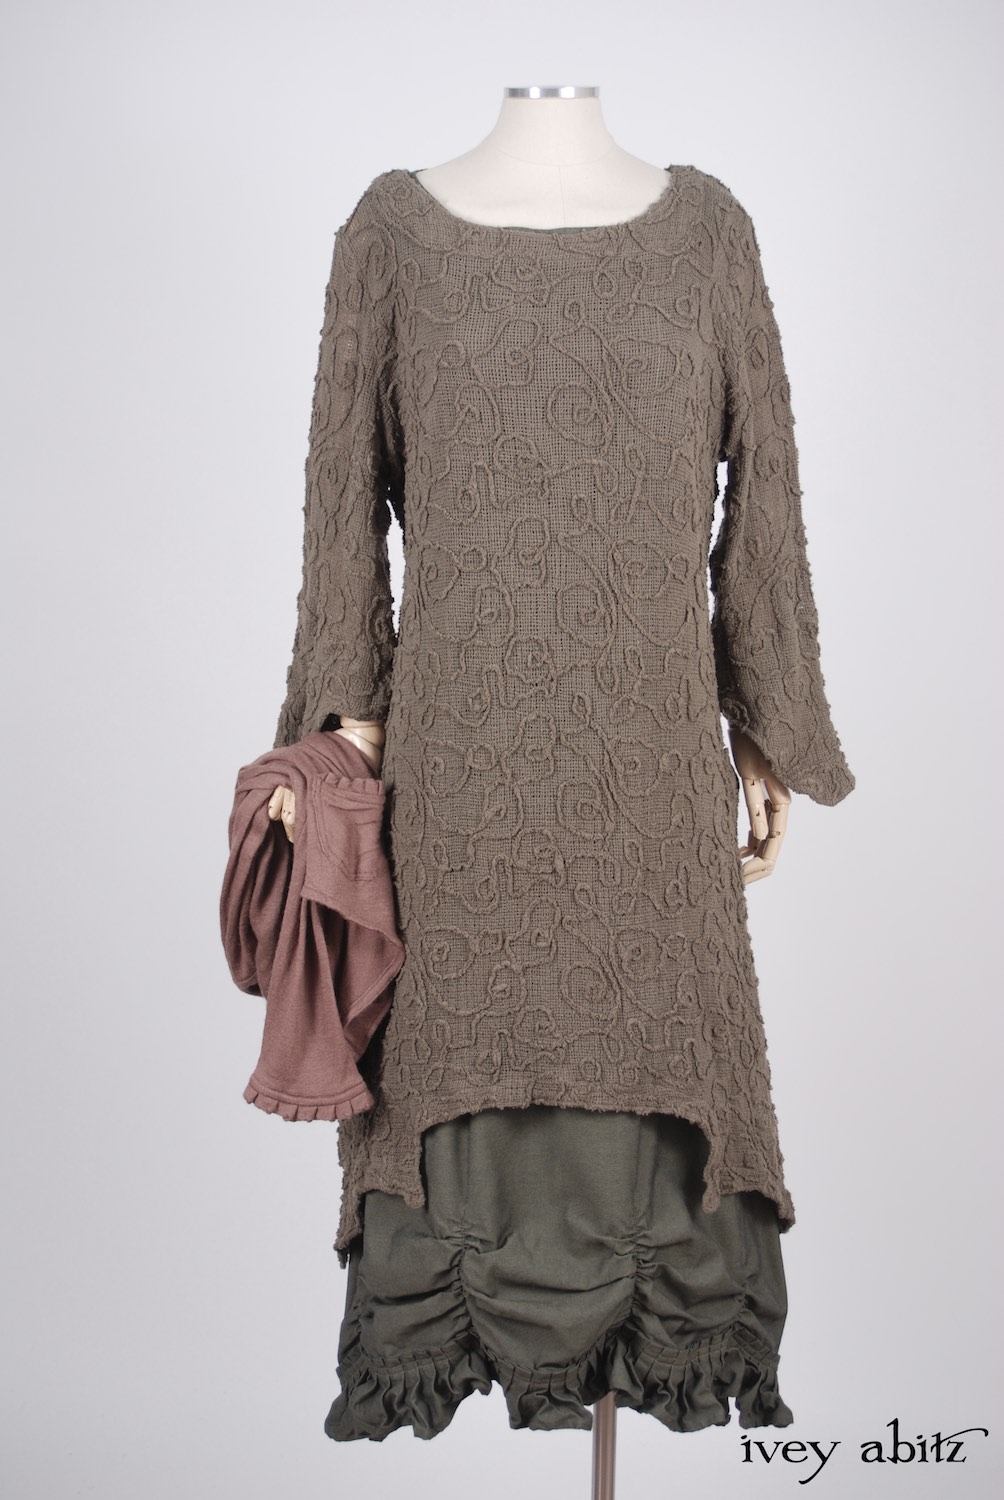 Ivey Abitz - Canterbury Cardigan in Blushed Cashmere Knit  - Chittister Dress in Meadow Embroidered Swirl Gauze  - Edenshire Frock in Morning Meadow Yarn Dyed Cotton, Low Water Length